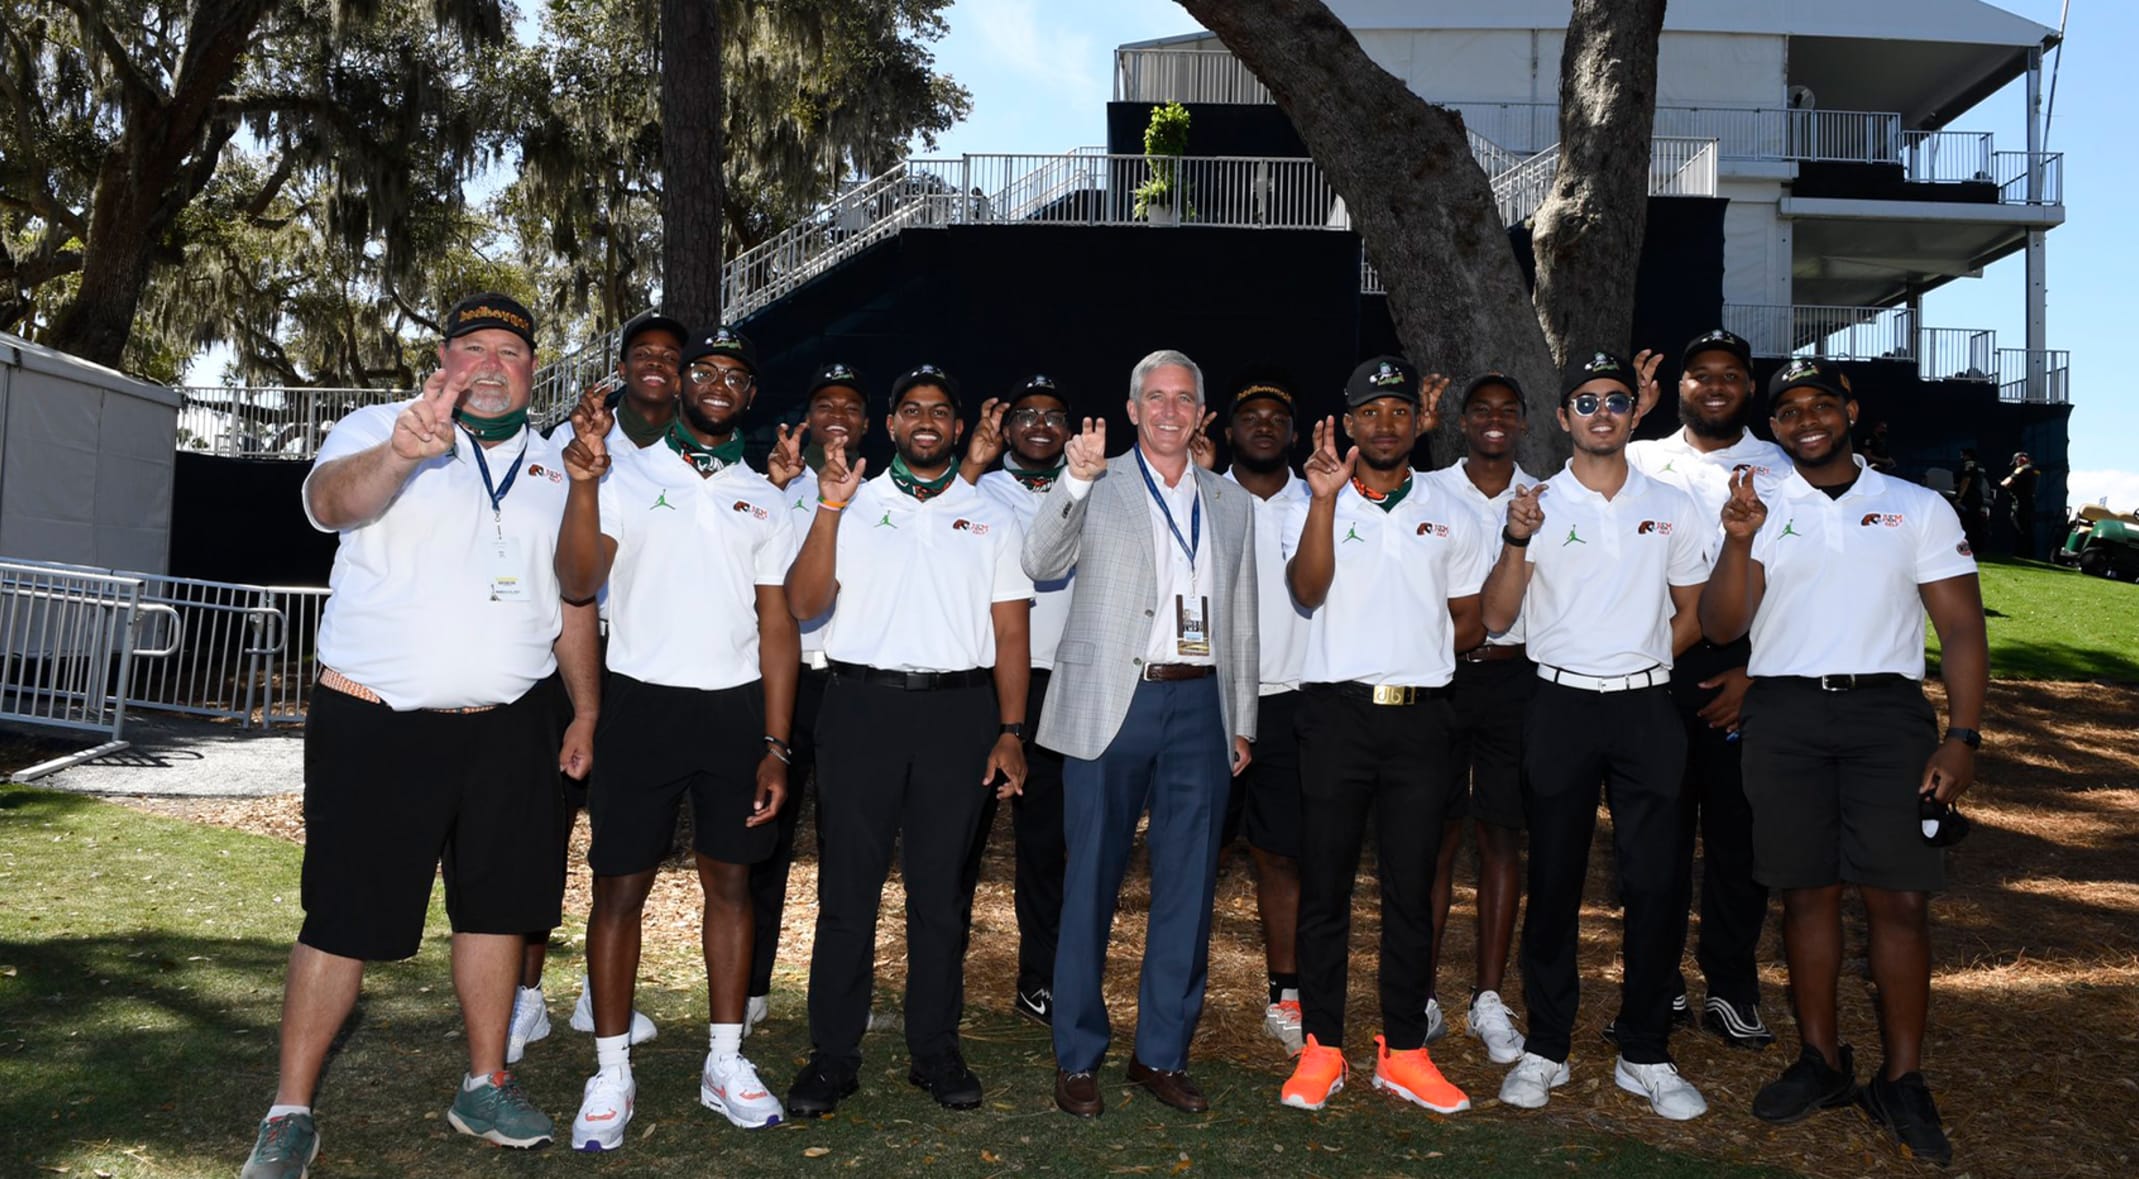 Famu Calendar Fall 2022 Famu Men's Golf Team Goes Behind-The-Scenes At The Players Championship